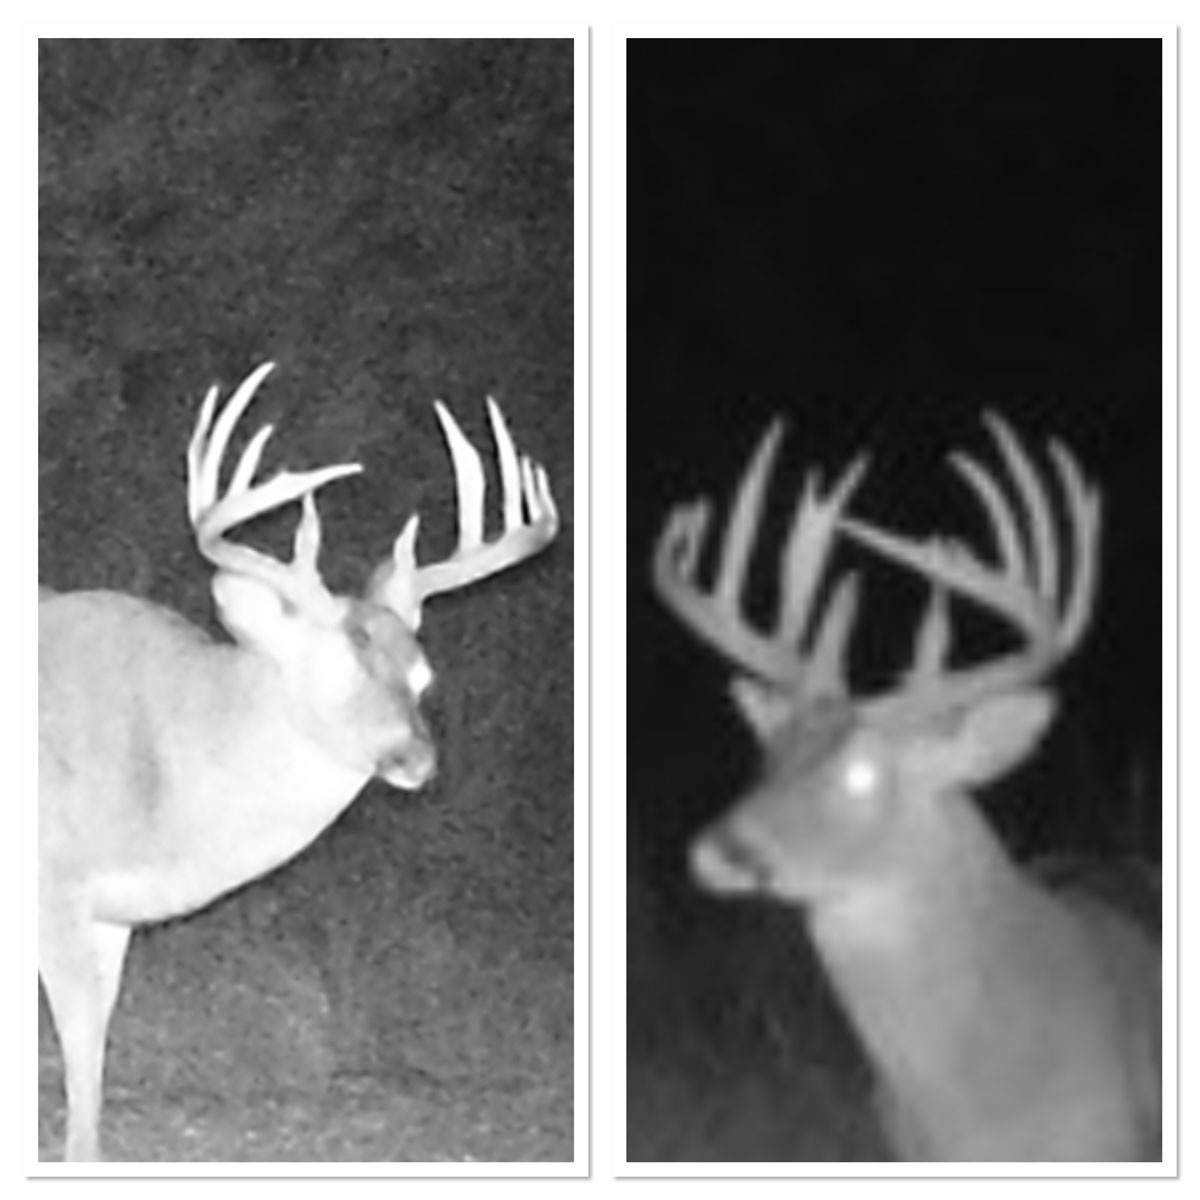 The trail cam photos of Kendra Menard's buck from 2020 (left) and 2021.